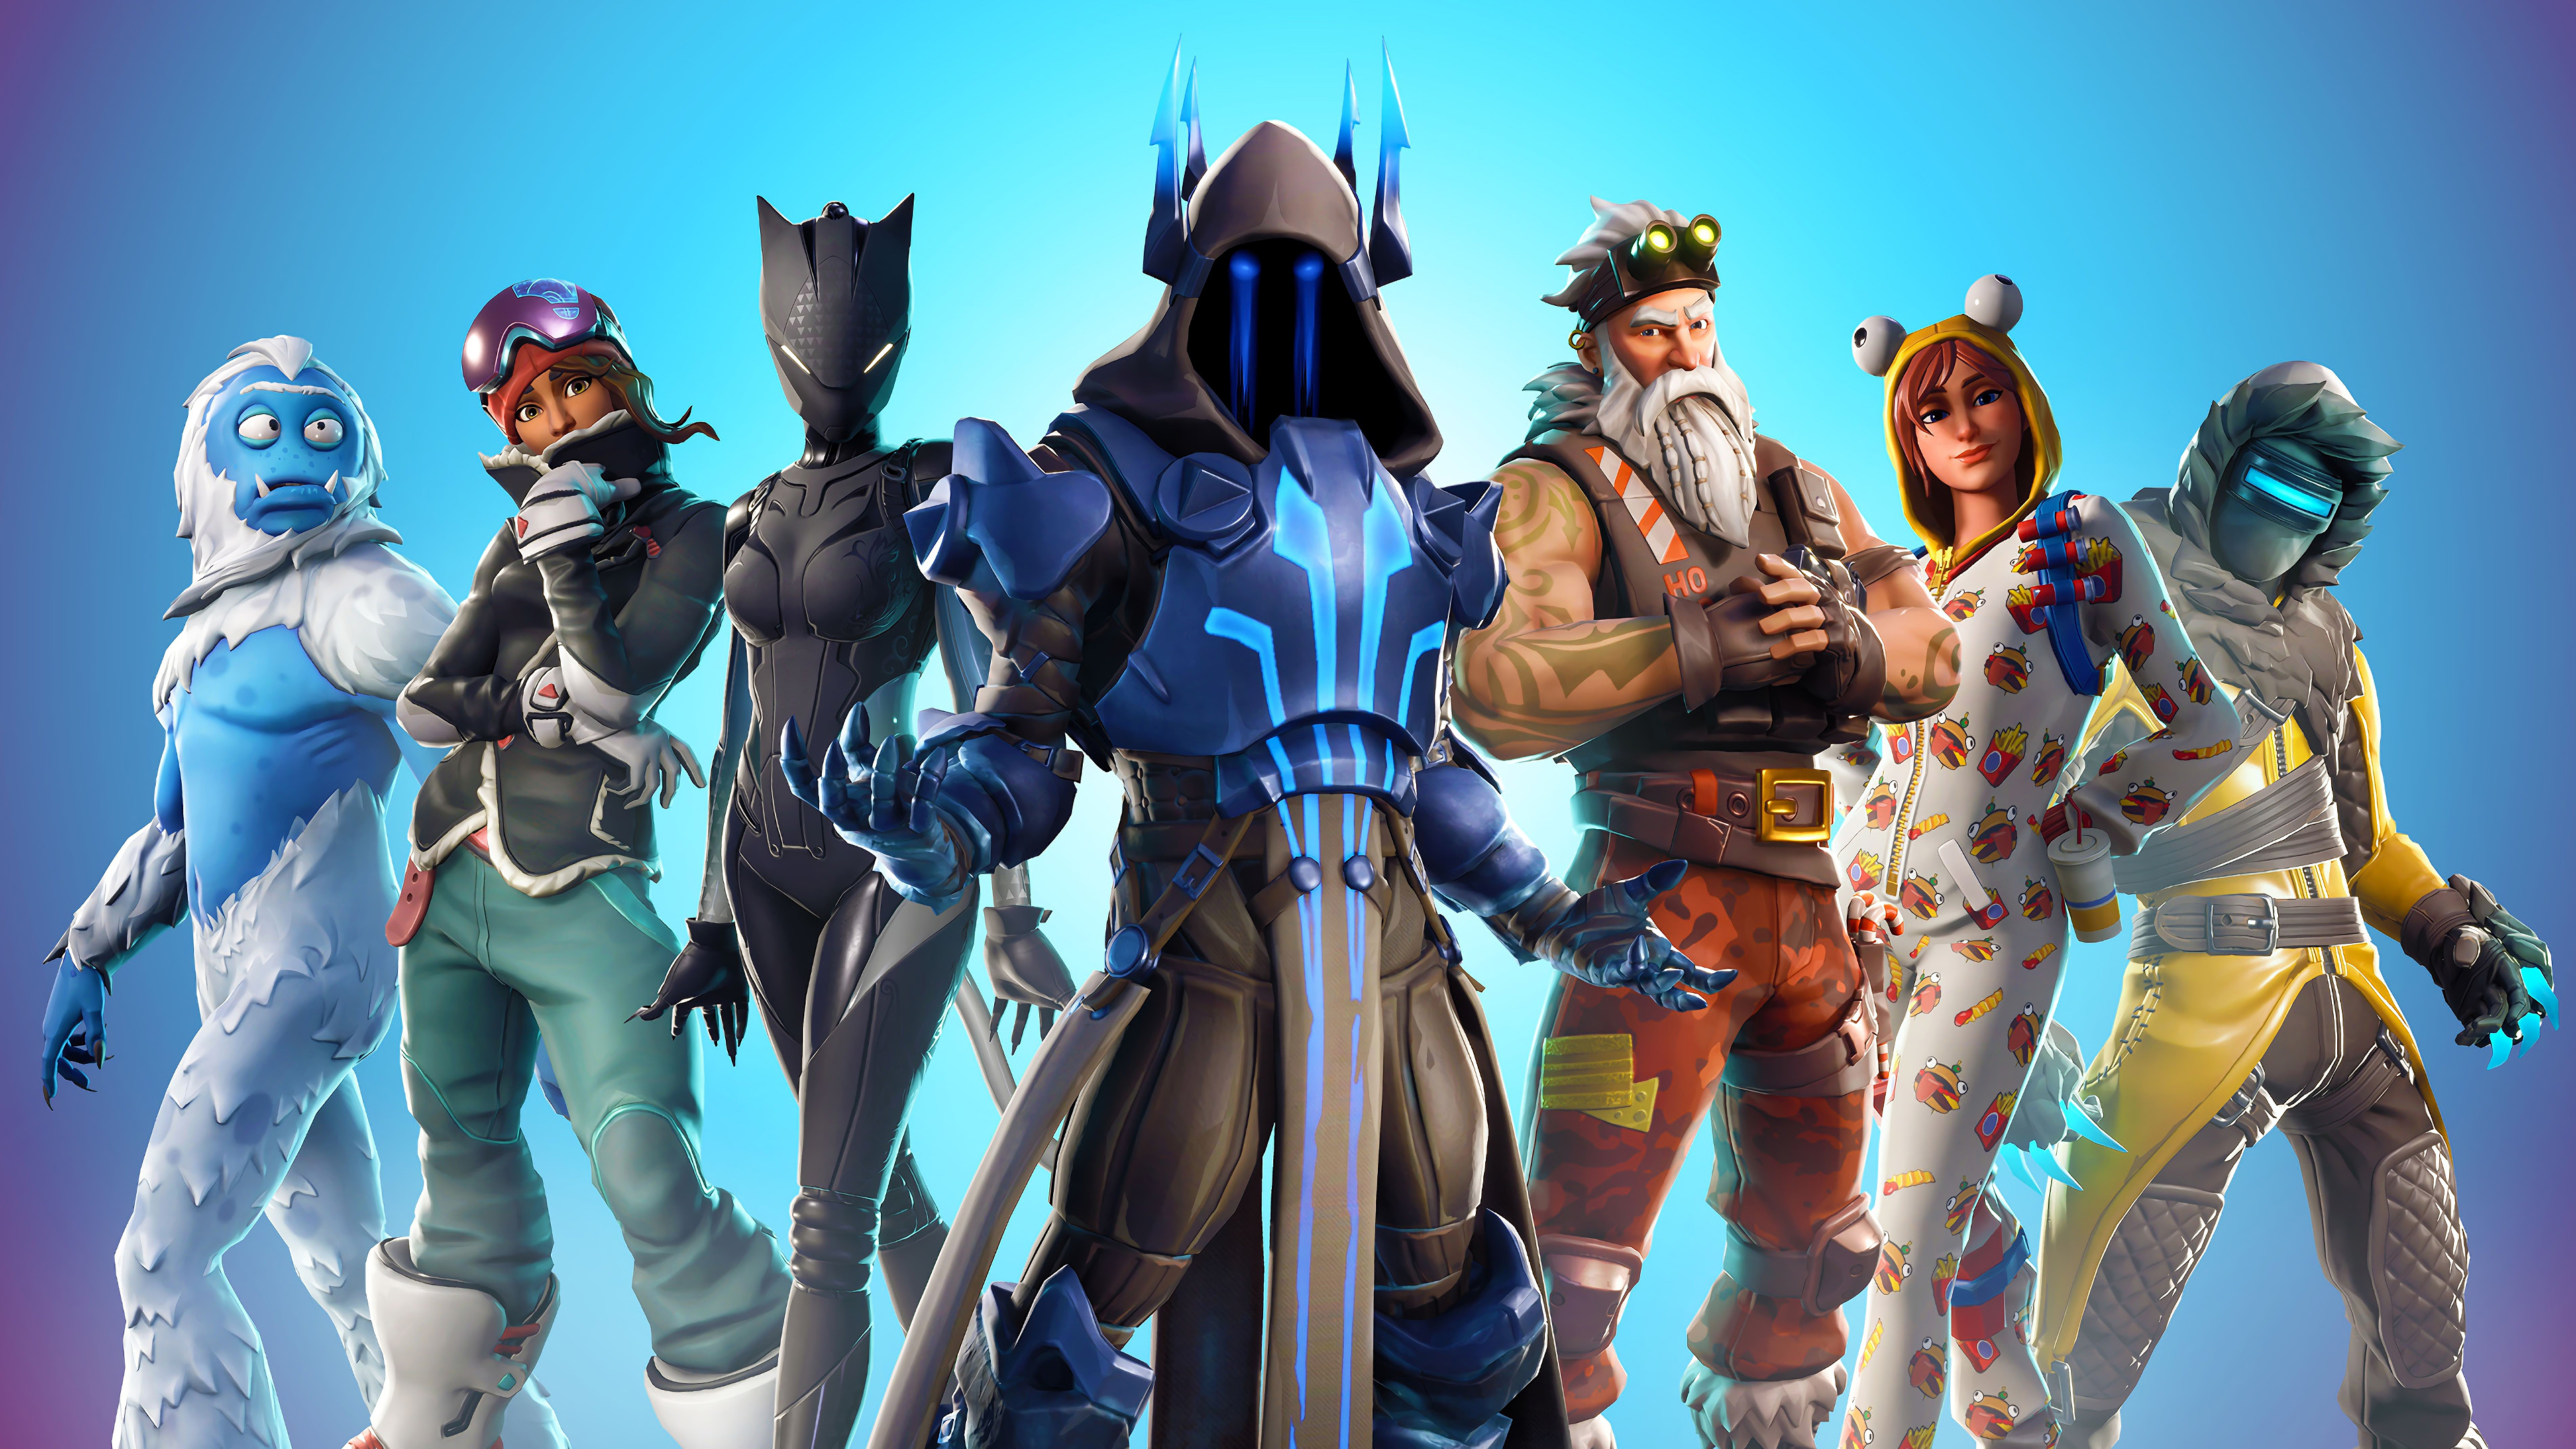 Check out 8 New Fortnite Wallpaper Full HD